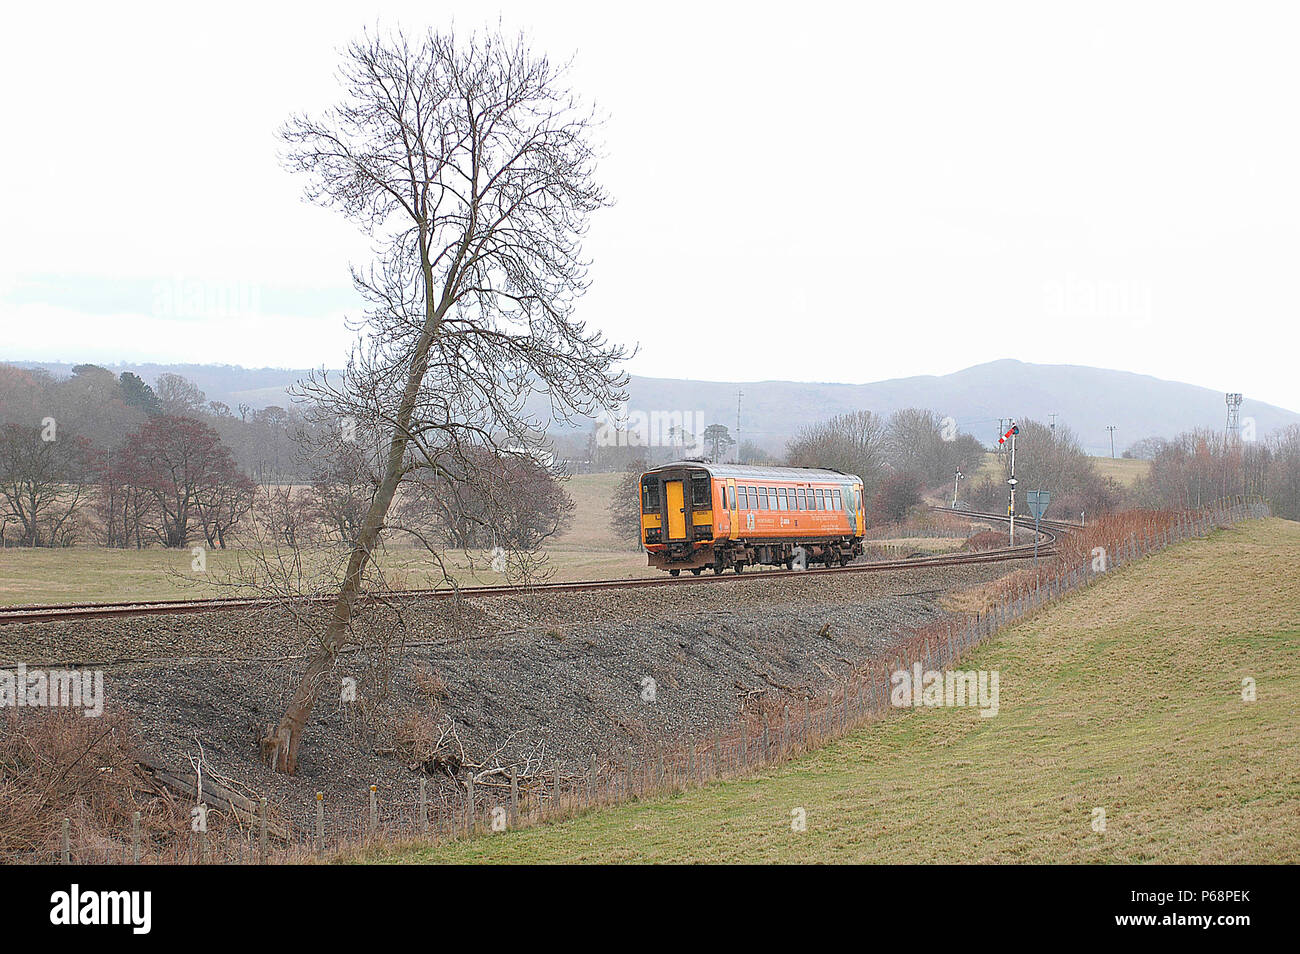 The Welsh Marches between Shrewsbury and Craven Arms serves two routes one of which is the Heart of Wales line that branches off to wander through the Stock Photo